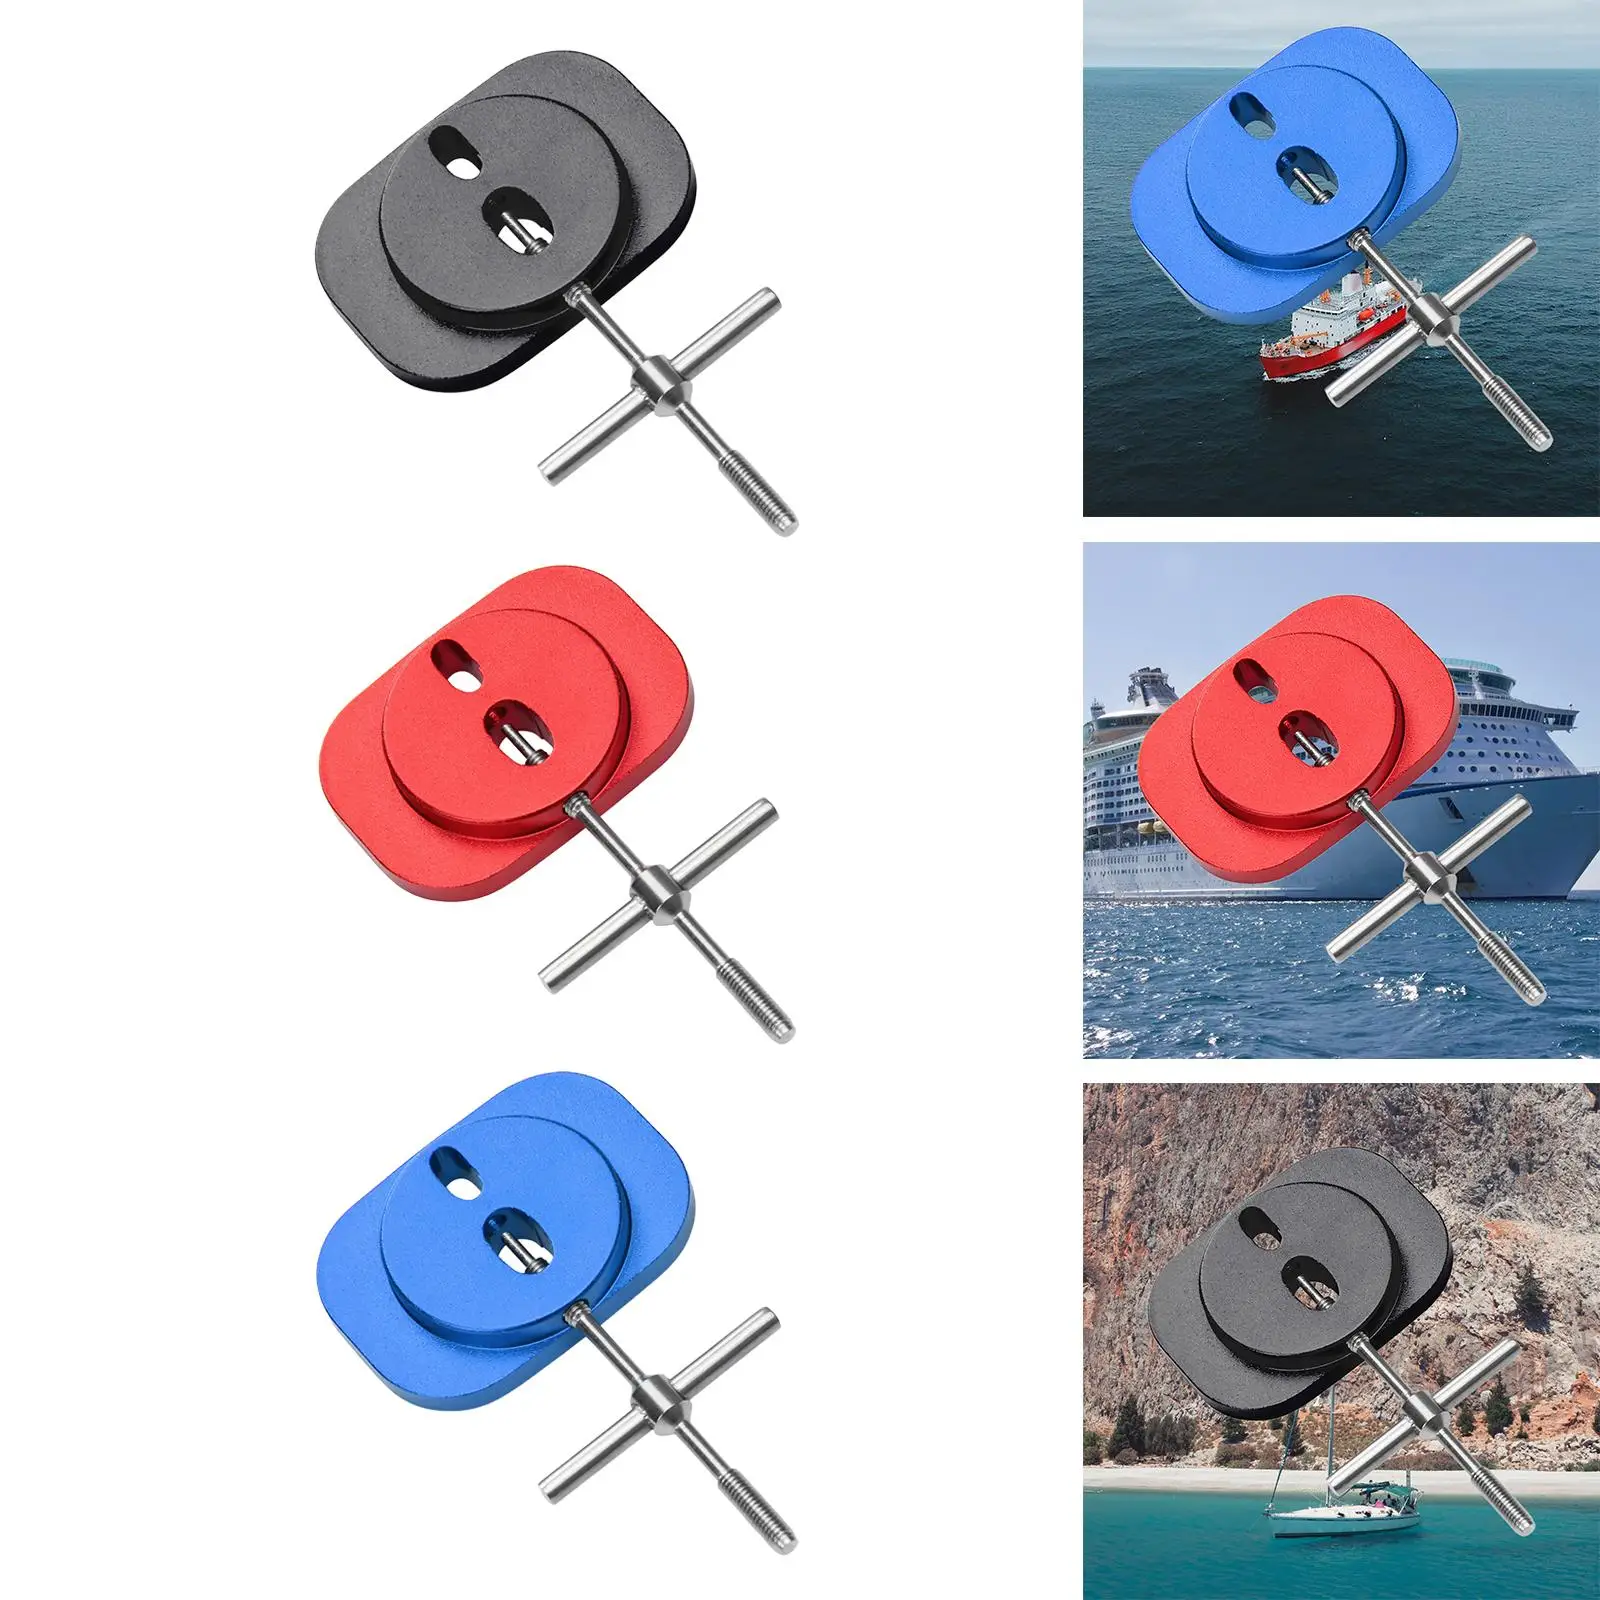 Universal Fishing Reel Removal Toolcasting Refit for DIY Modified Tool